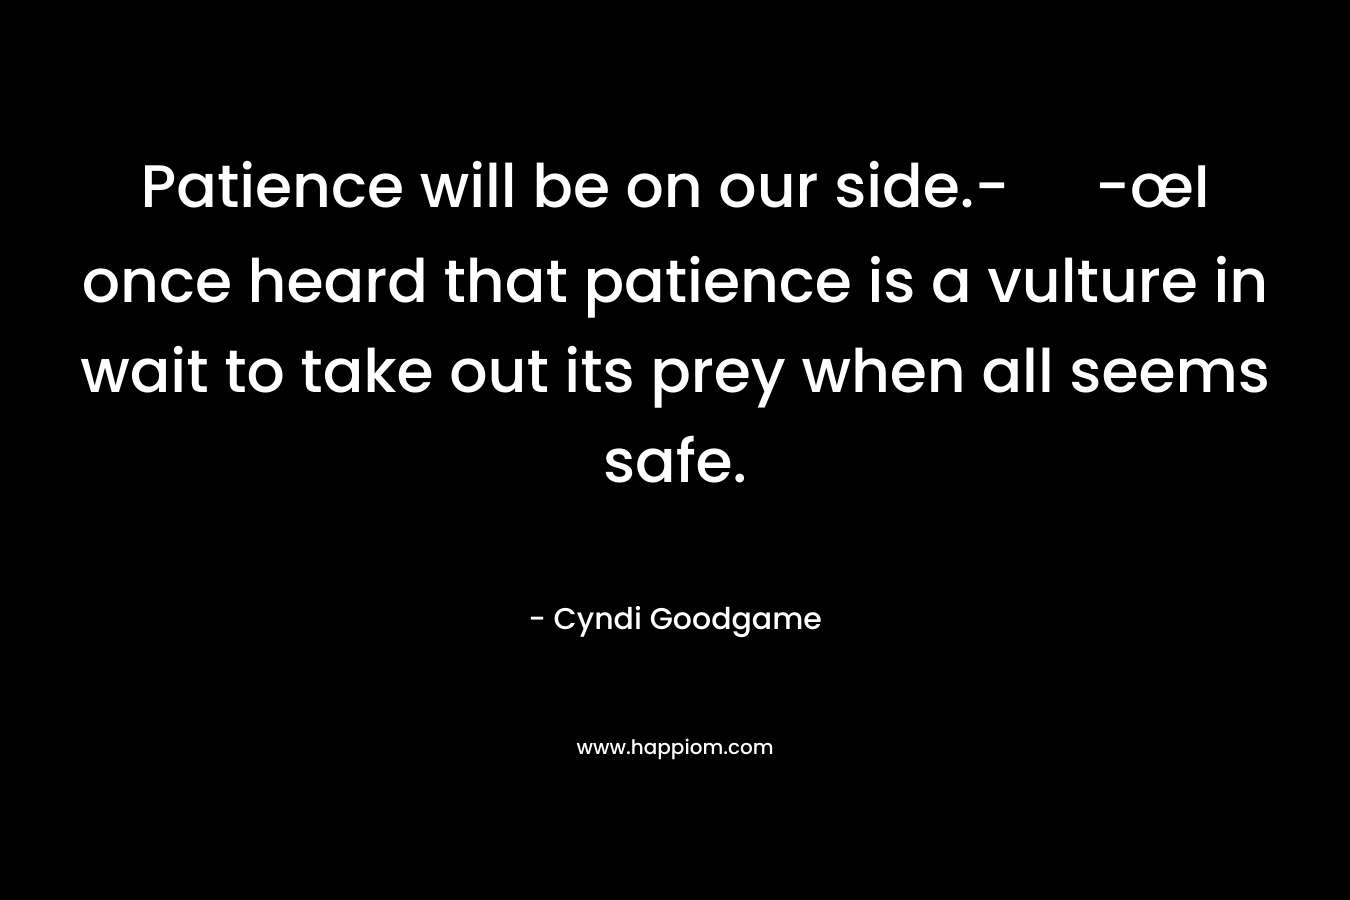 Patience will be on our side.- -œI once heard that patience is a vulture in wait to take out its prey when all seems safe. – Cyndi Goodgame